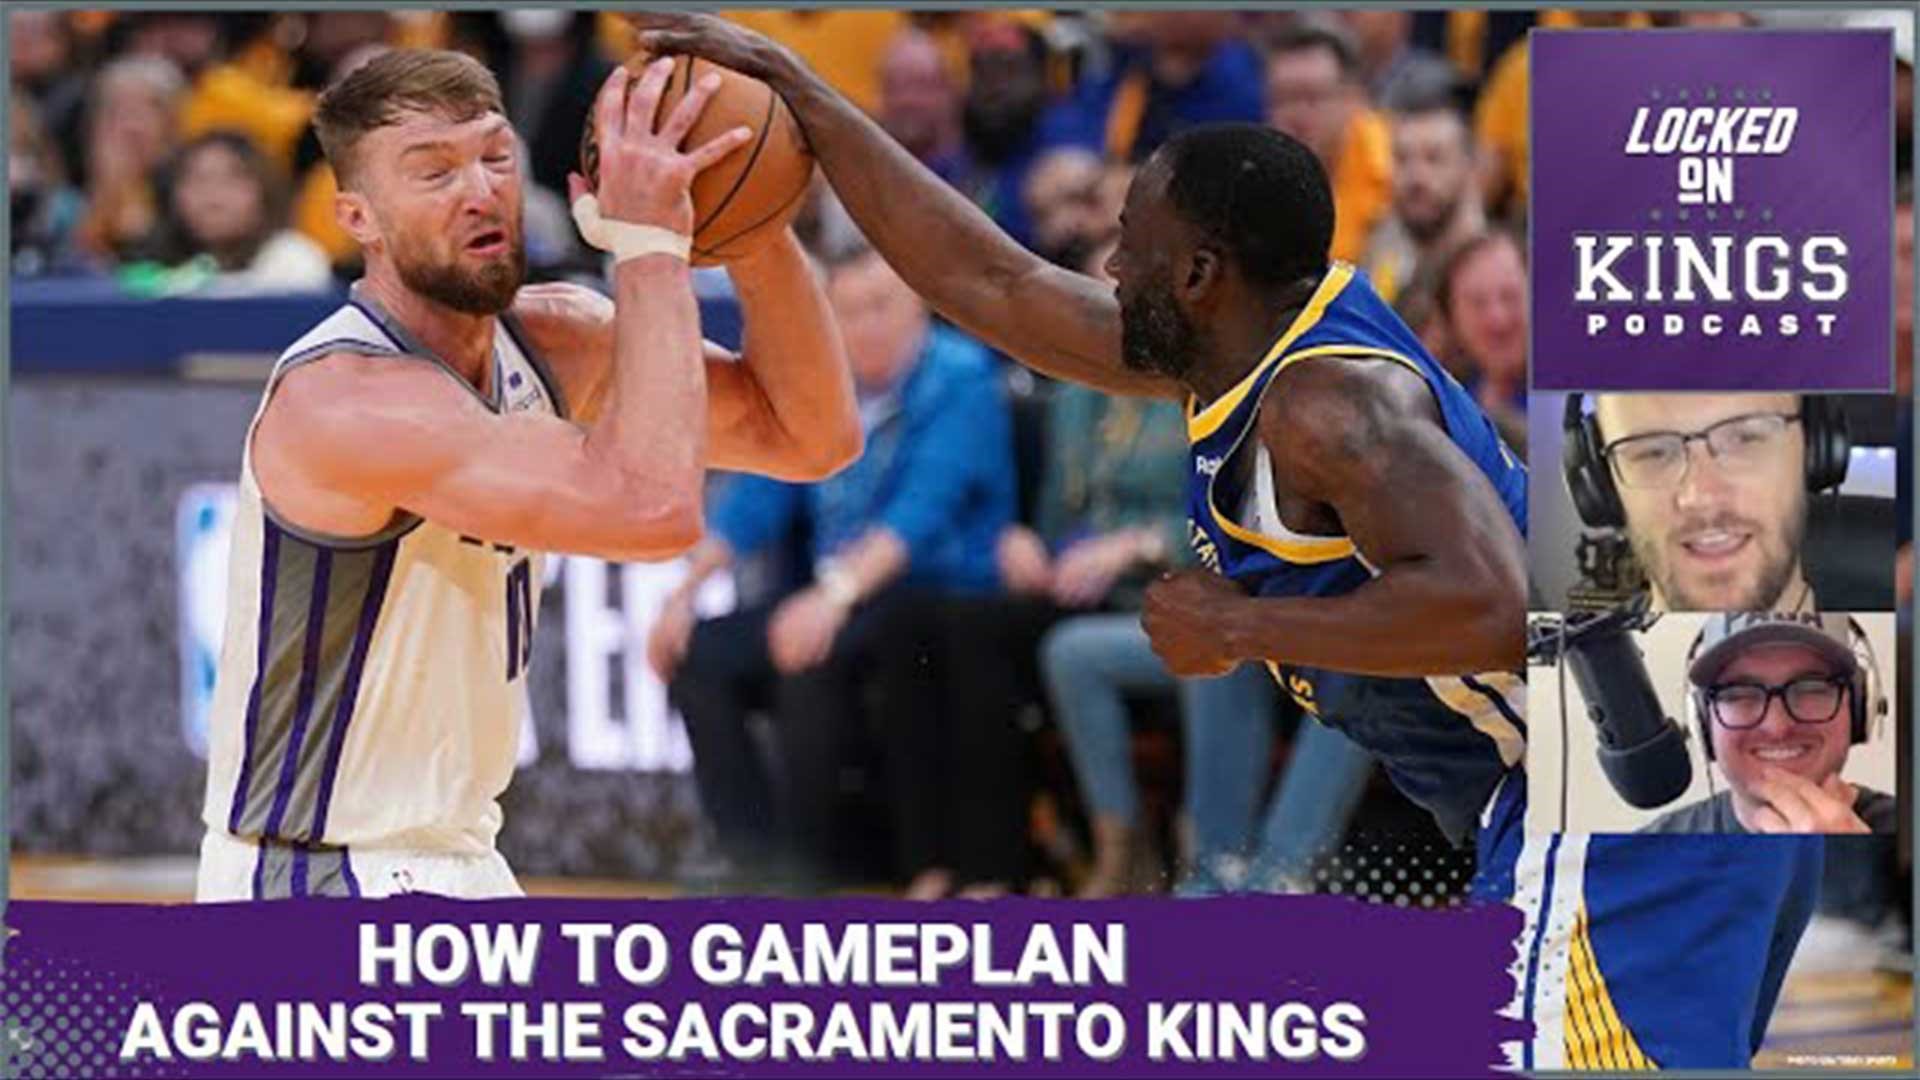 Matt George is joined by Kings beat writer for the Sacramento Bee, Chris Biderman, to discuss how teams will gameplan against the Kings this season.